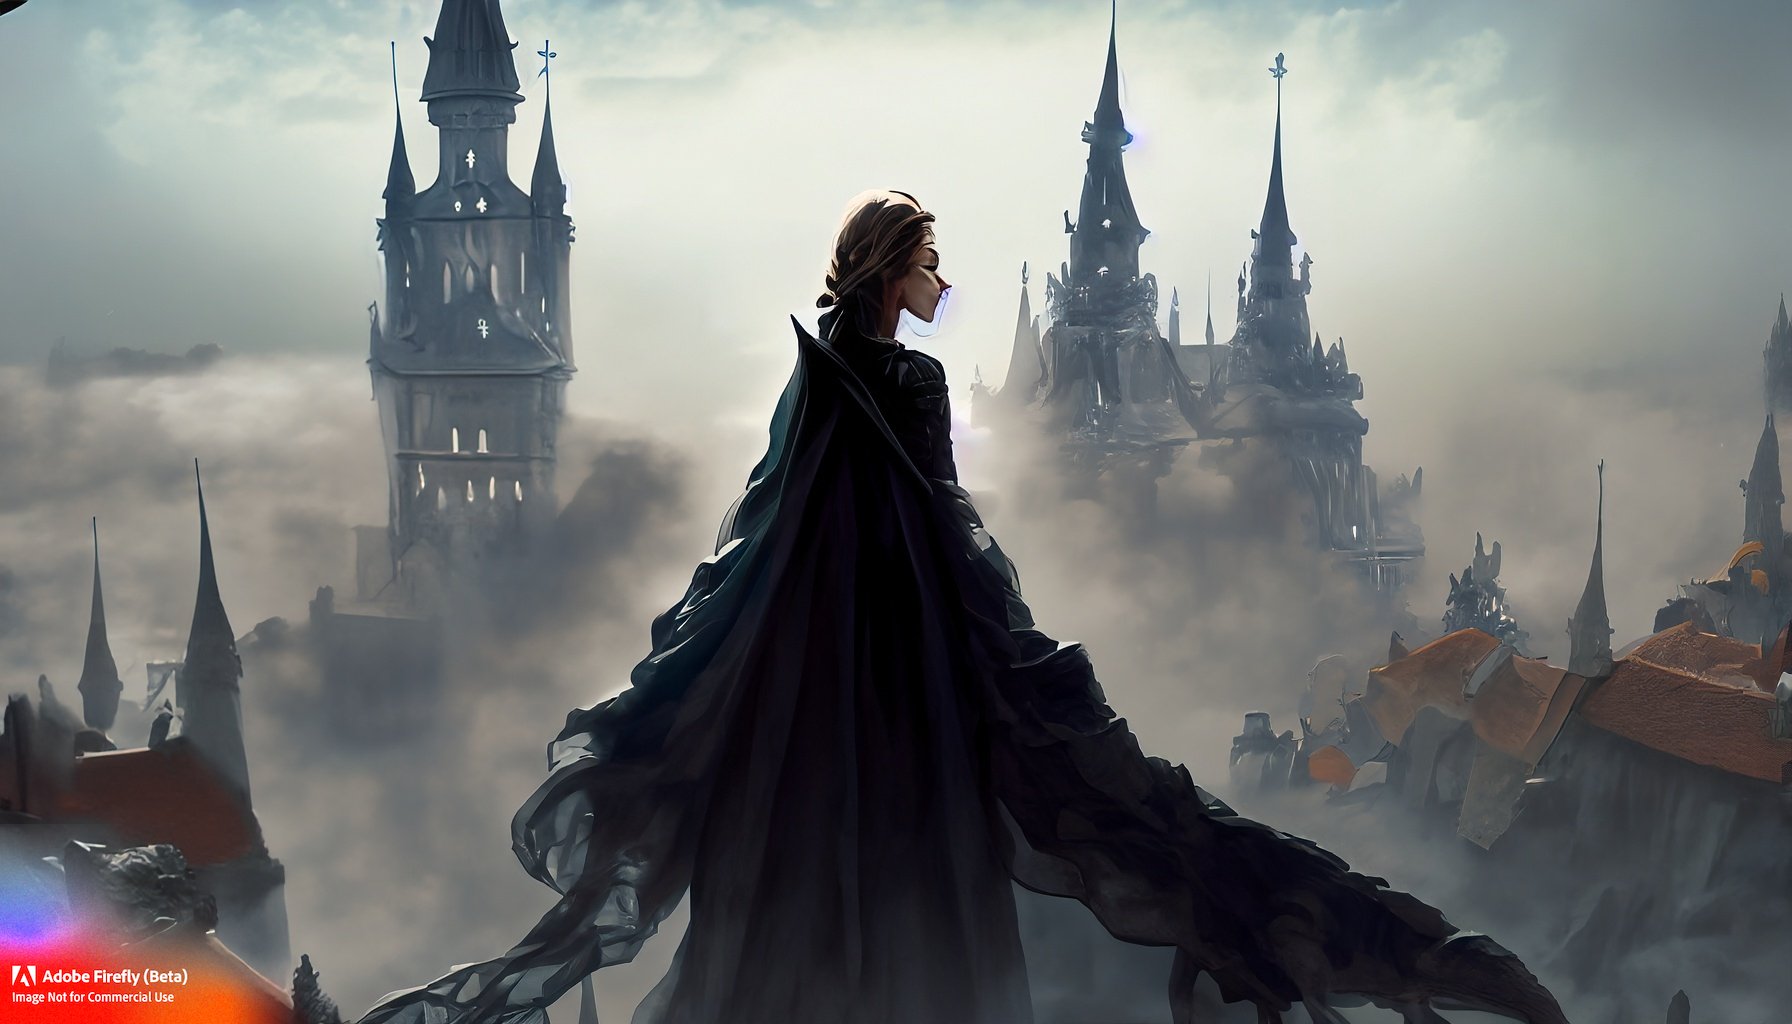 Firefly_mist+and fog, person in a dark cape made of fabric ribbons. The person is flying, there's an ancient city rooftops, coins and glass vials, a castle with many spires_art,wide_angle,fantasy_86265.jpg